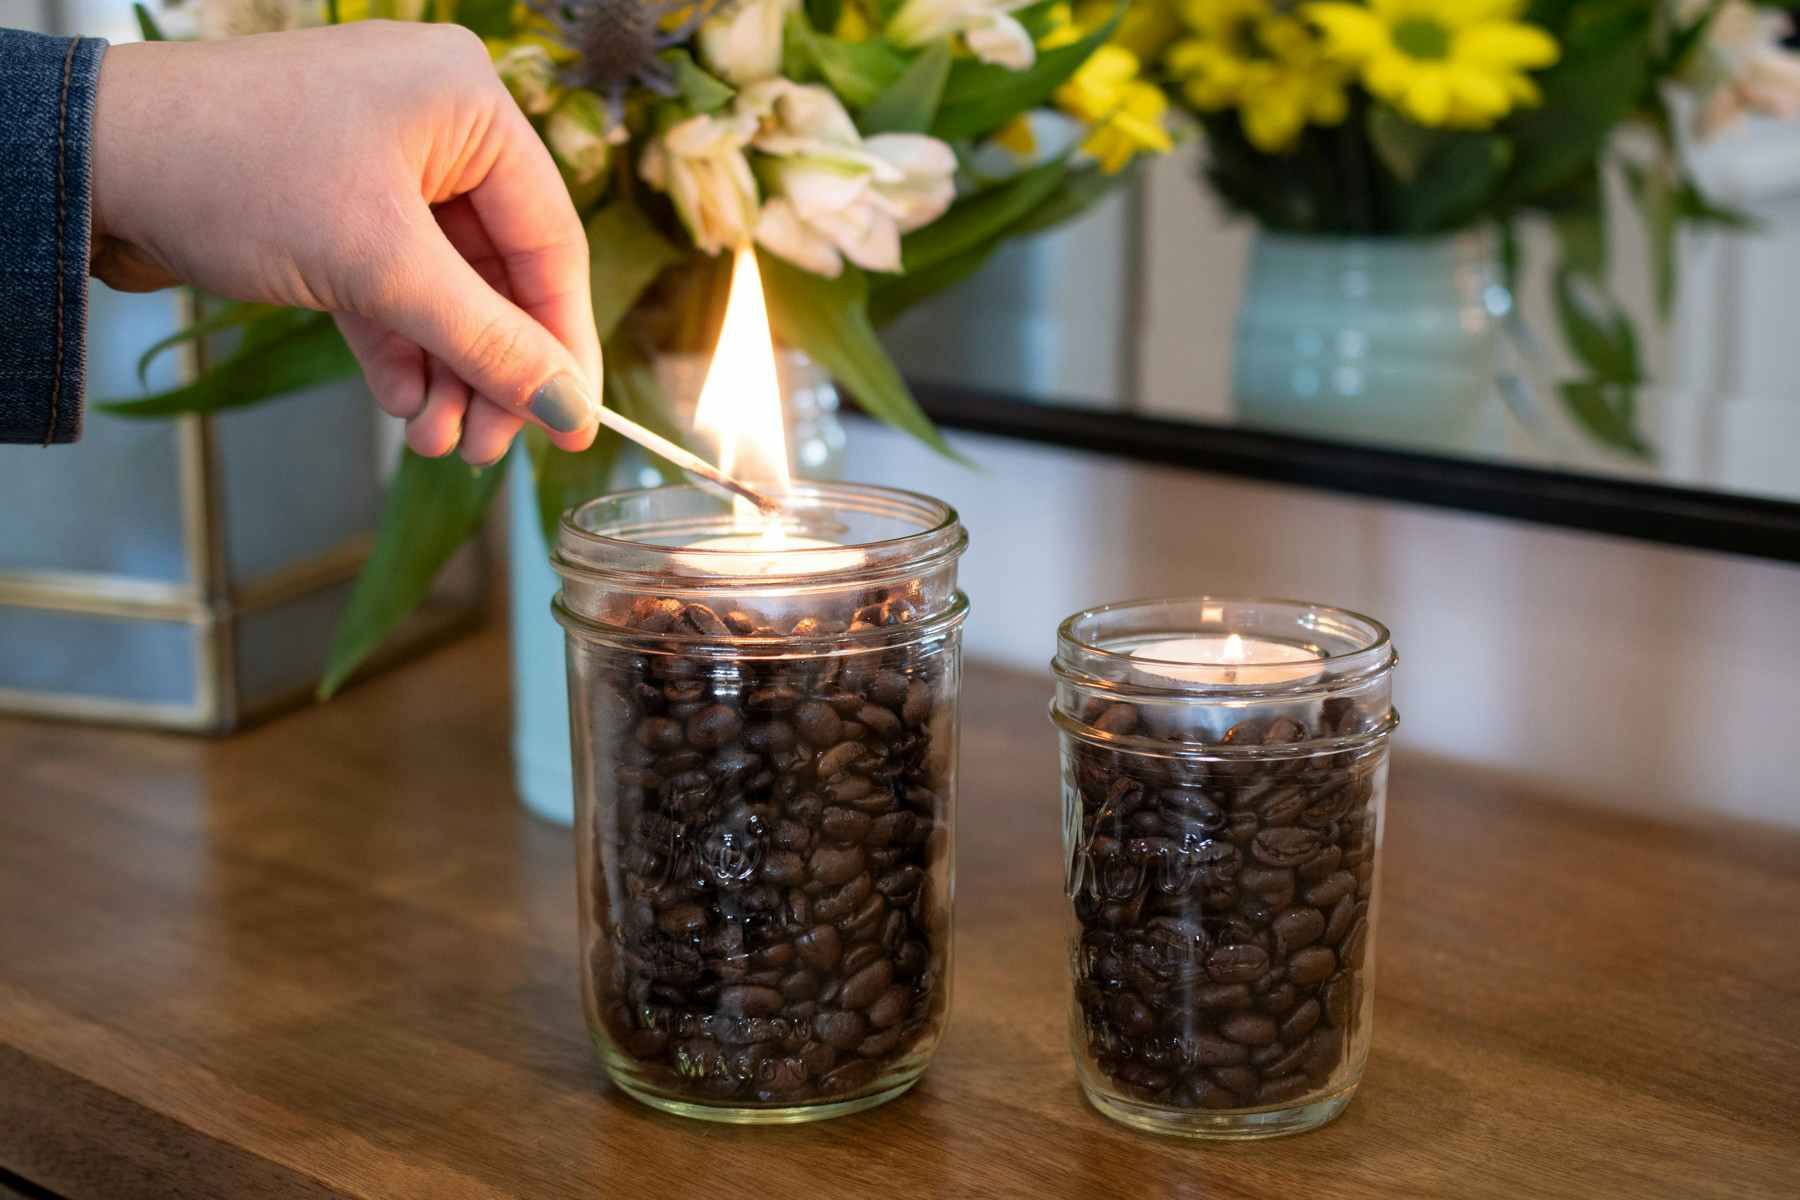 Woman lighting a tealight placed in a jar filled with coffee beans